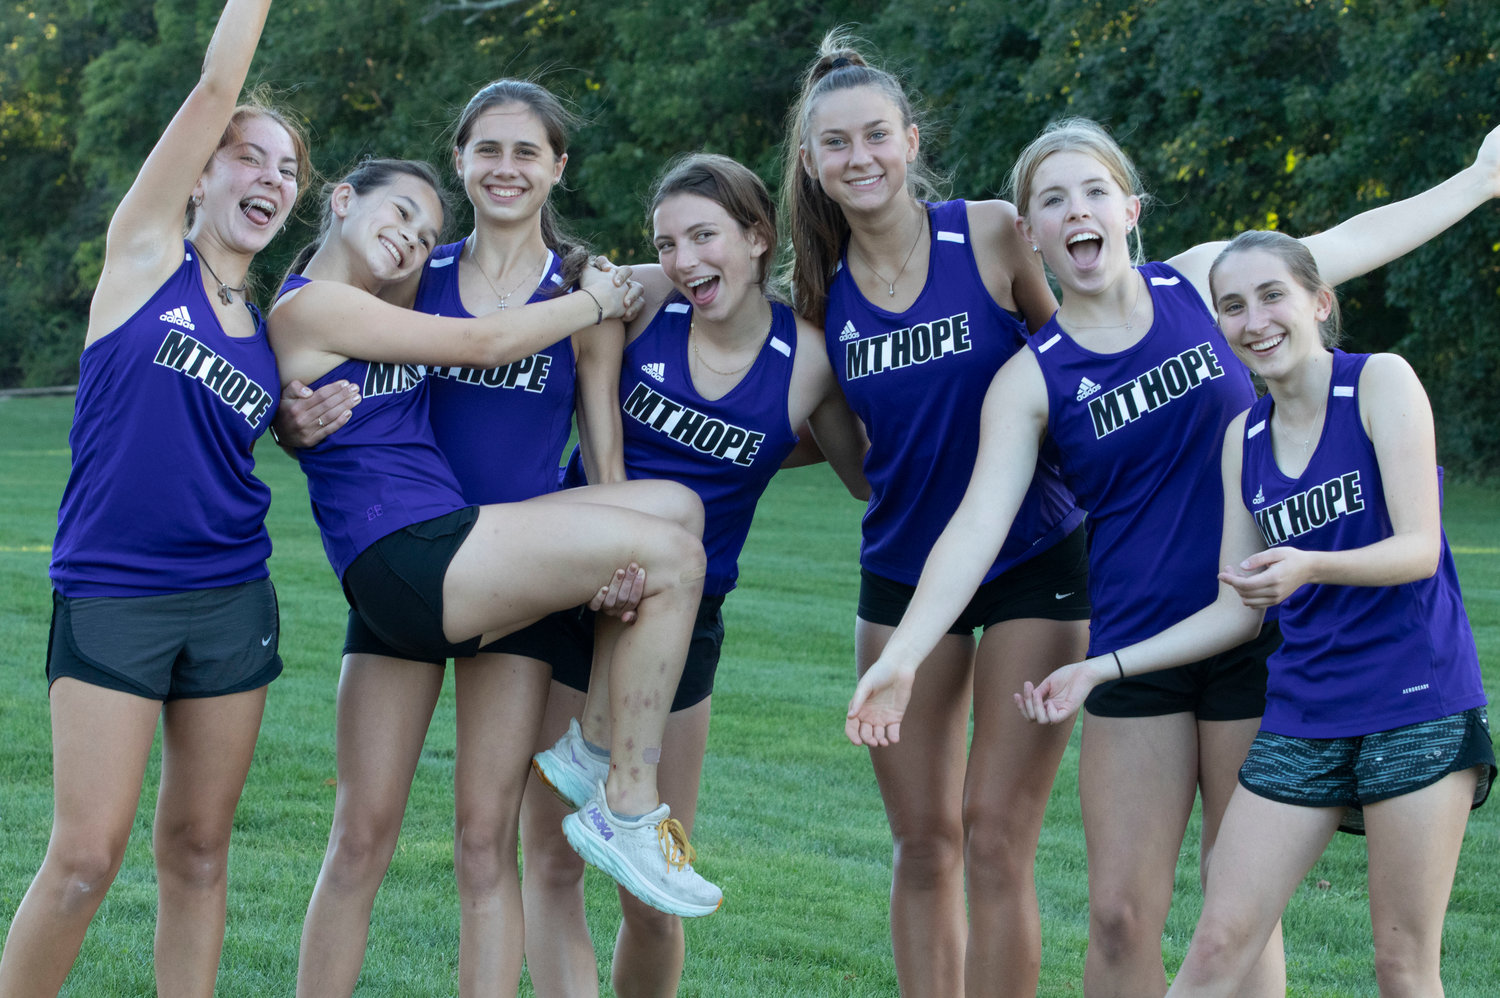 The Huskies girls cross country team from left, Analucia Romero, Ryan Coffey, Jessica Deal, Sonia Bradley, Reyn Ferris, Lily Dasilveira, and Lucy O’Brien, posted their best regular season record ever at 8-3, according to coach Susan Rancourt. The team is waiting their fate about qualifying for states as a team.